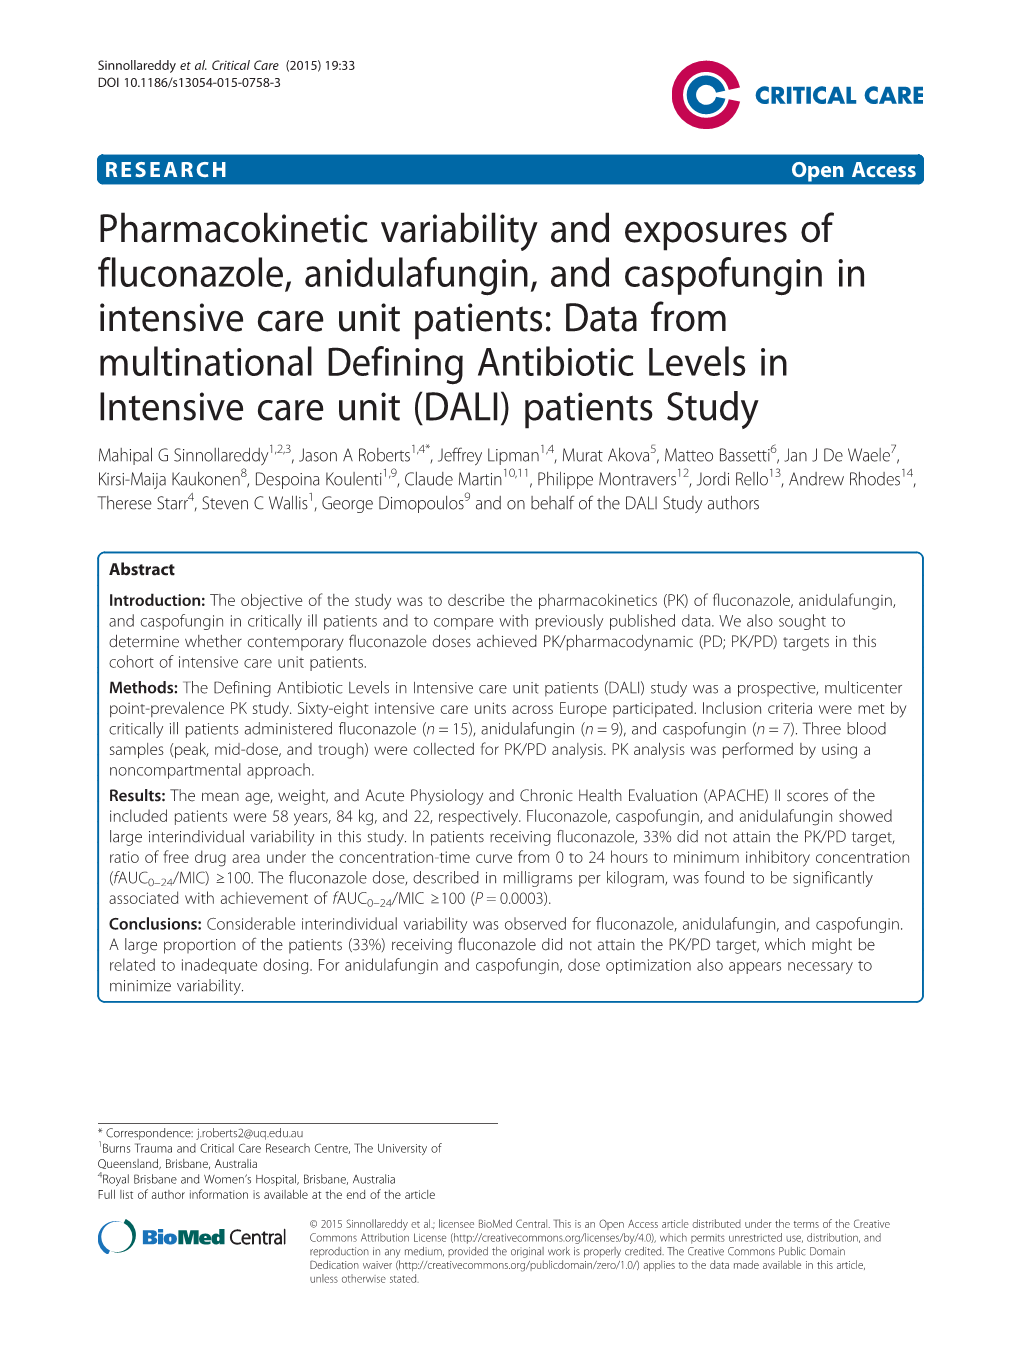 Pharmacokinetic Variability and Exposures Of